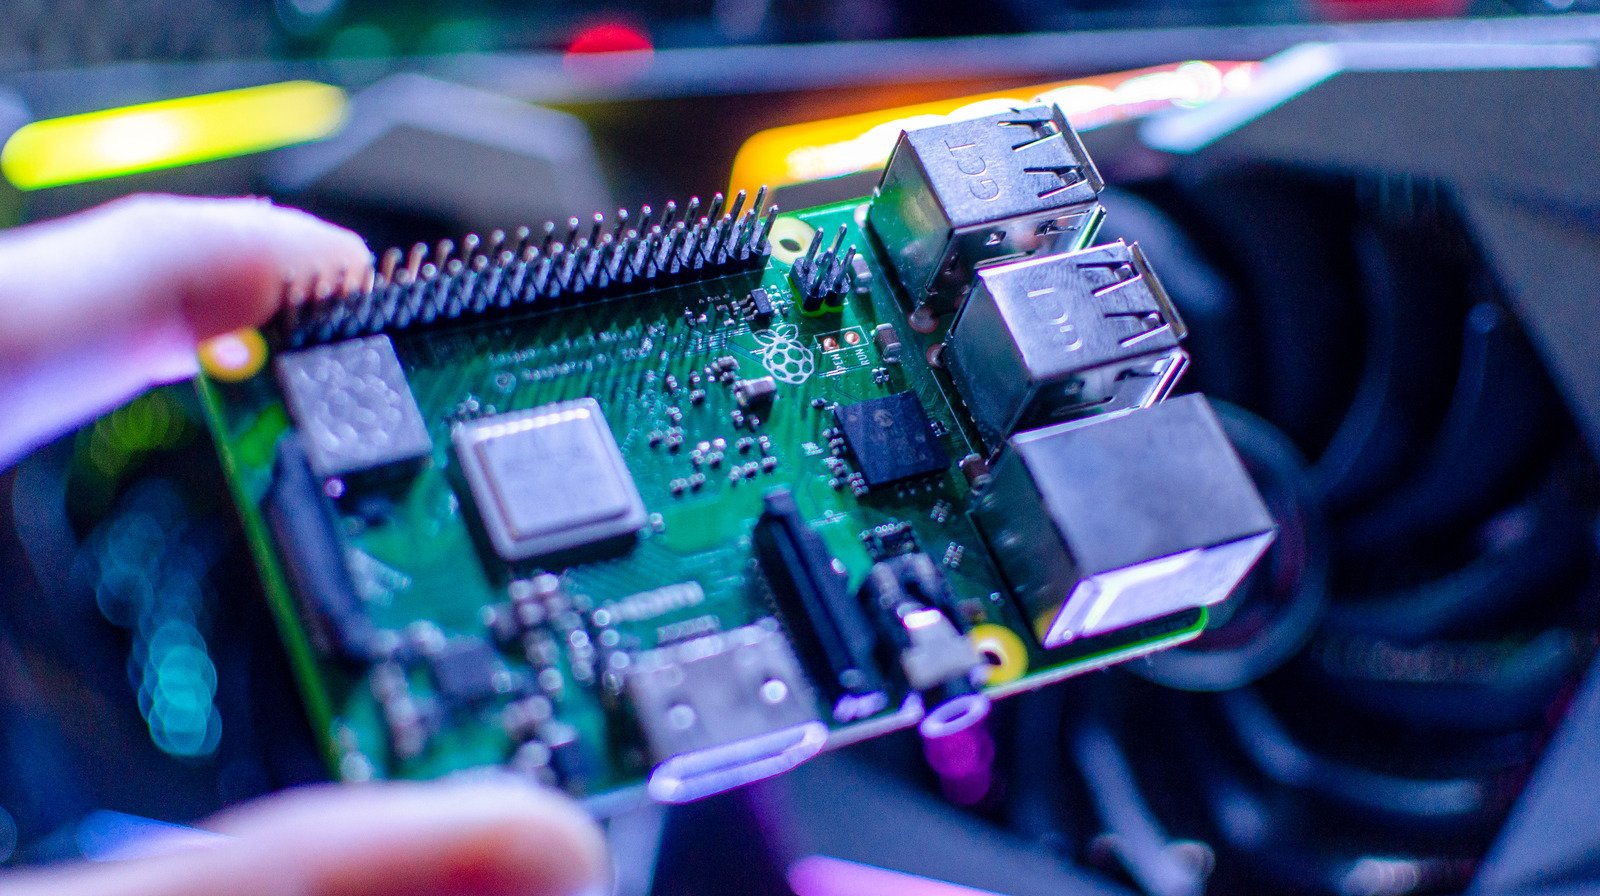 Don’t Be Fooled By Raspberry Pi Money Making Schemes: Here’s How To Spot Them